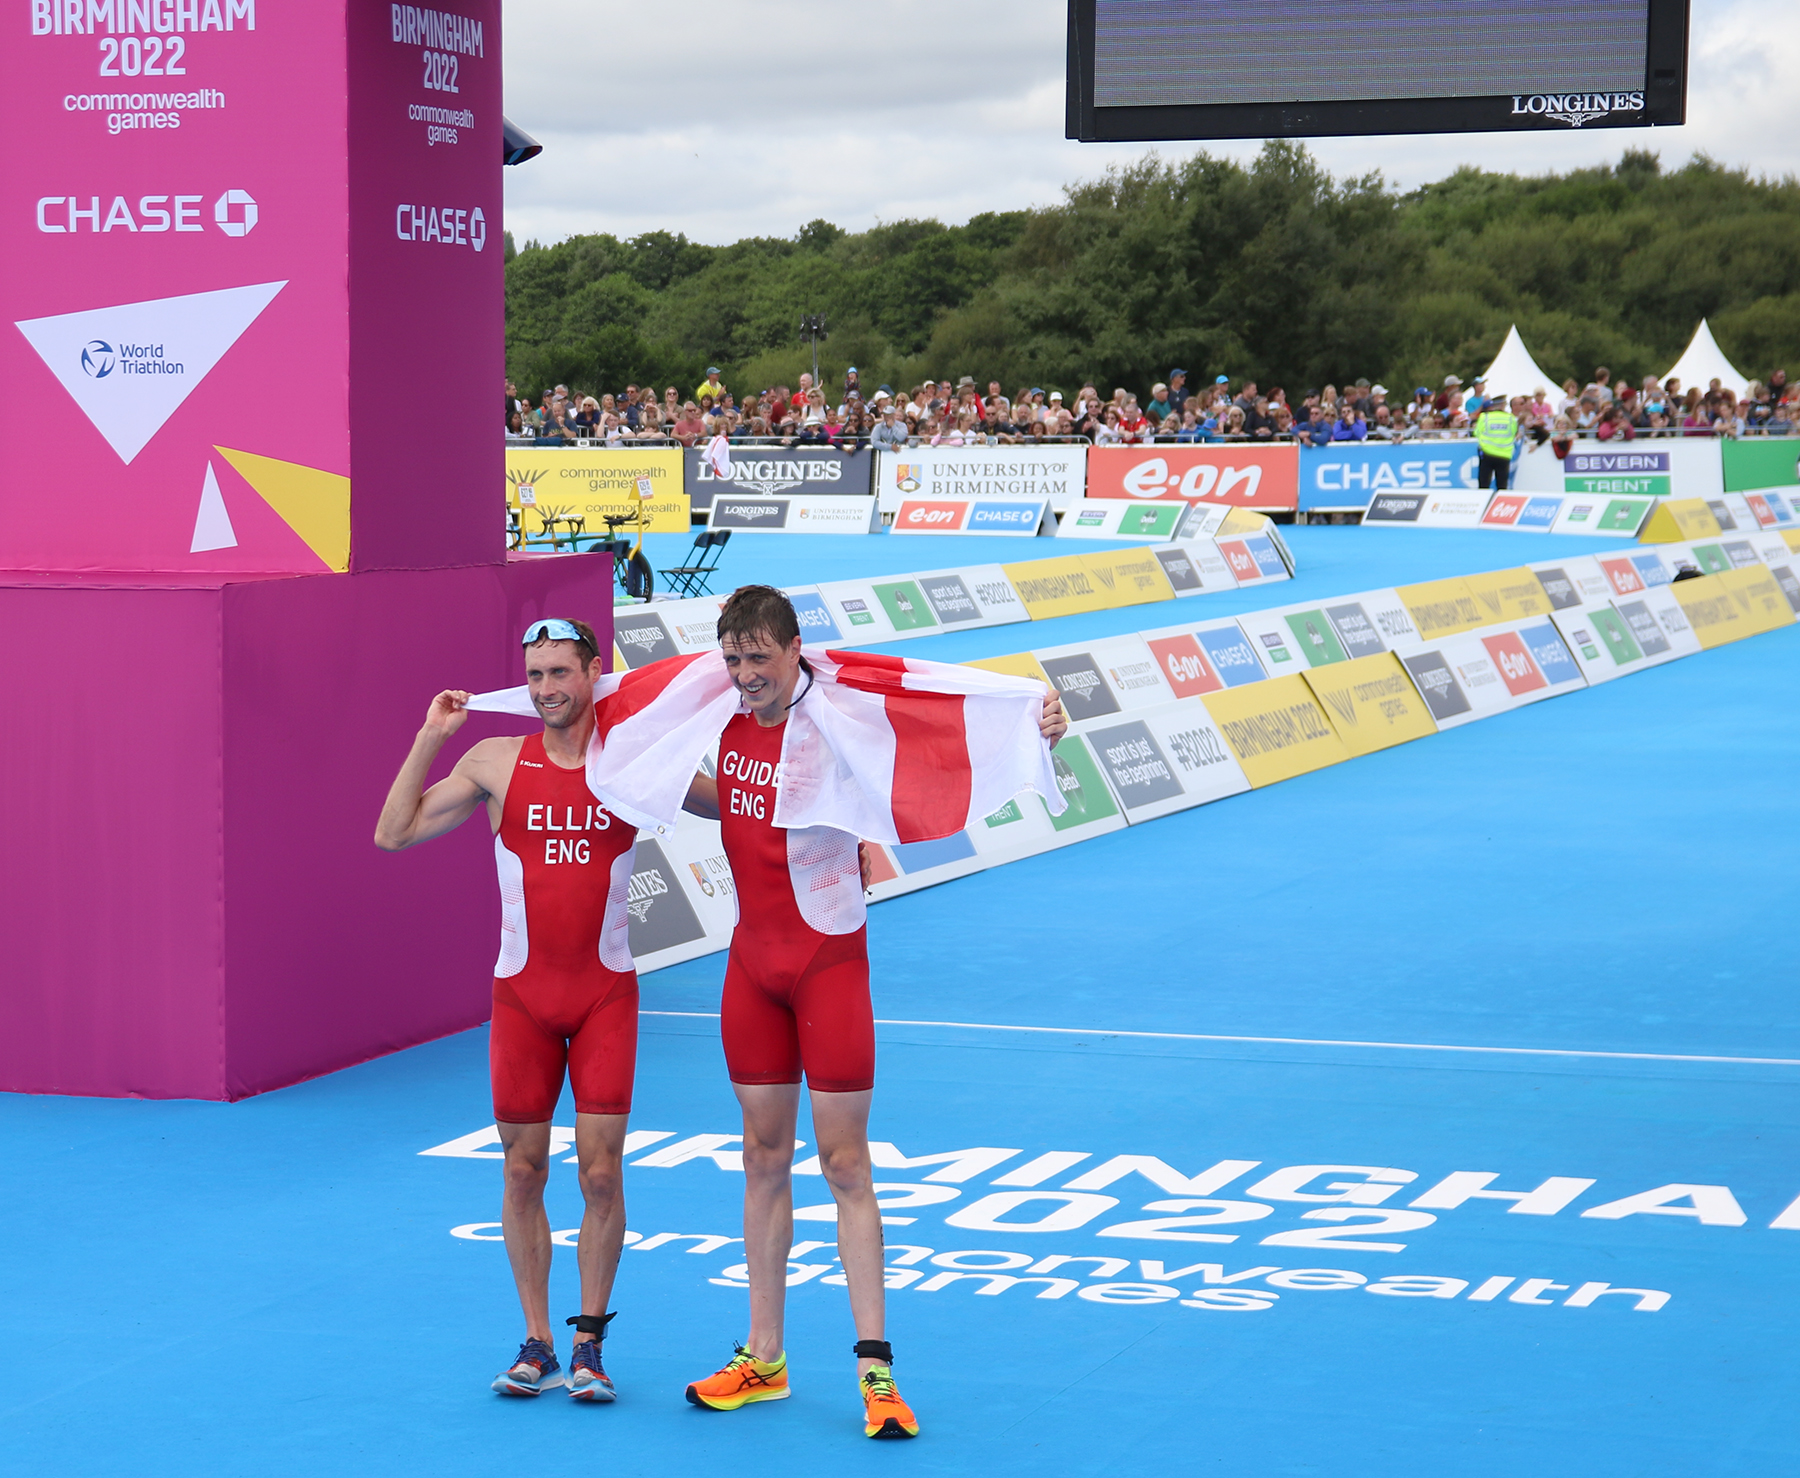 Image shows runners at the finish line, holding England flag.